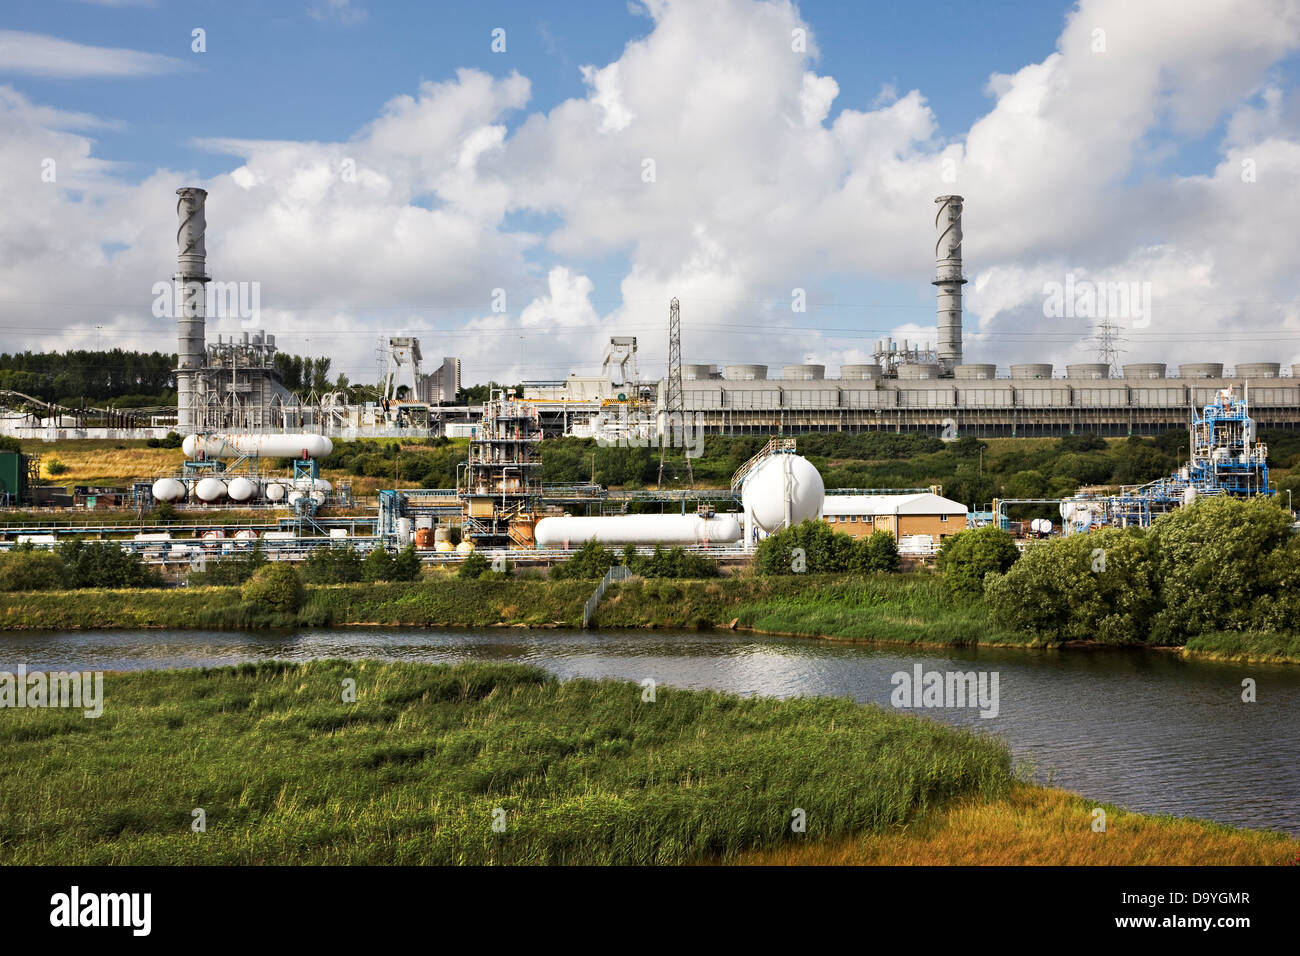 Chemical plant on the banks of the River Weaver, Runcorn, Cheshire, England Stock Photo